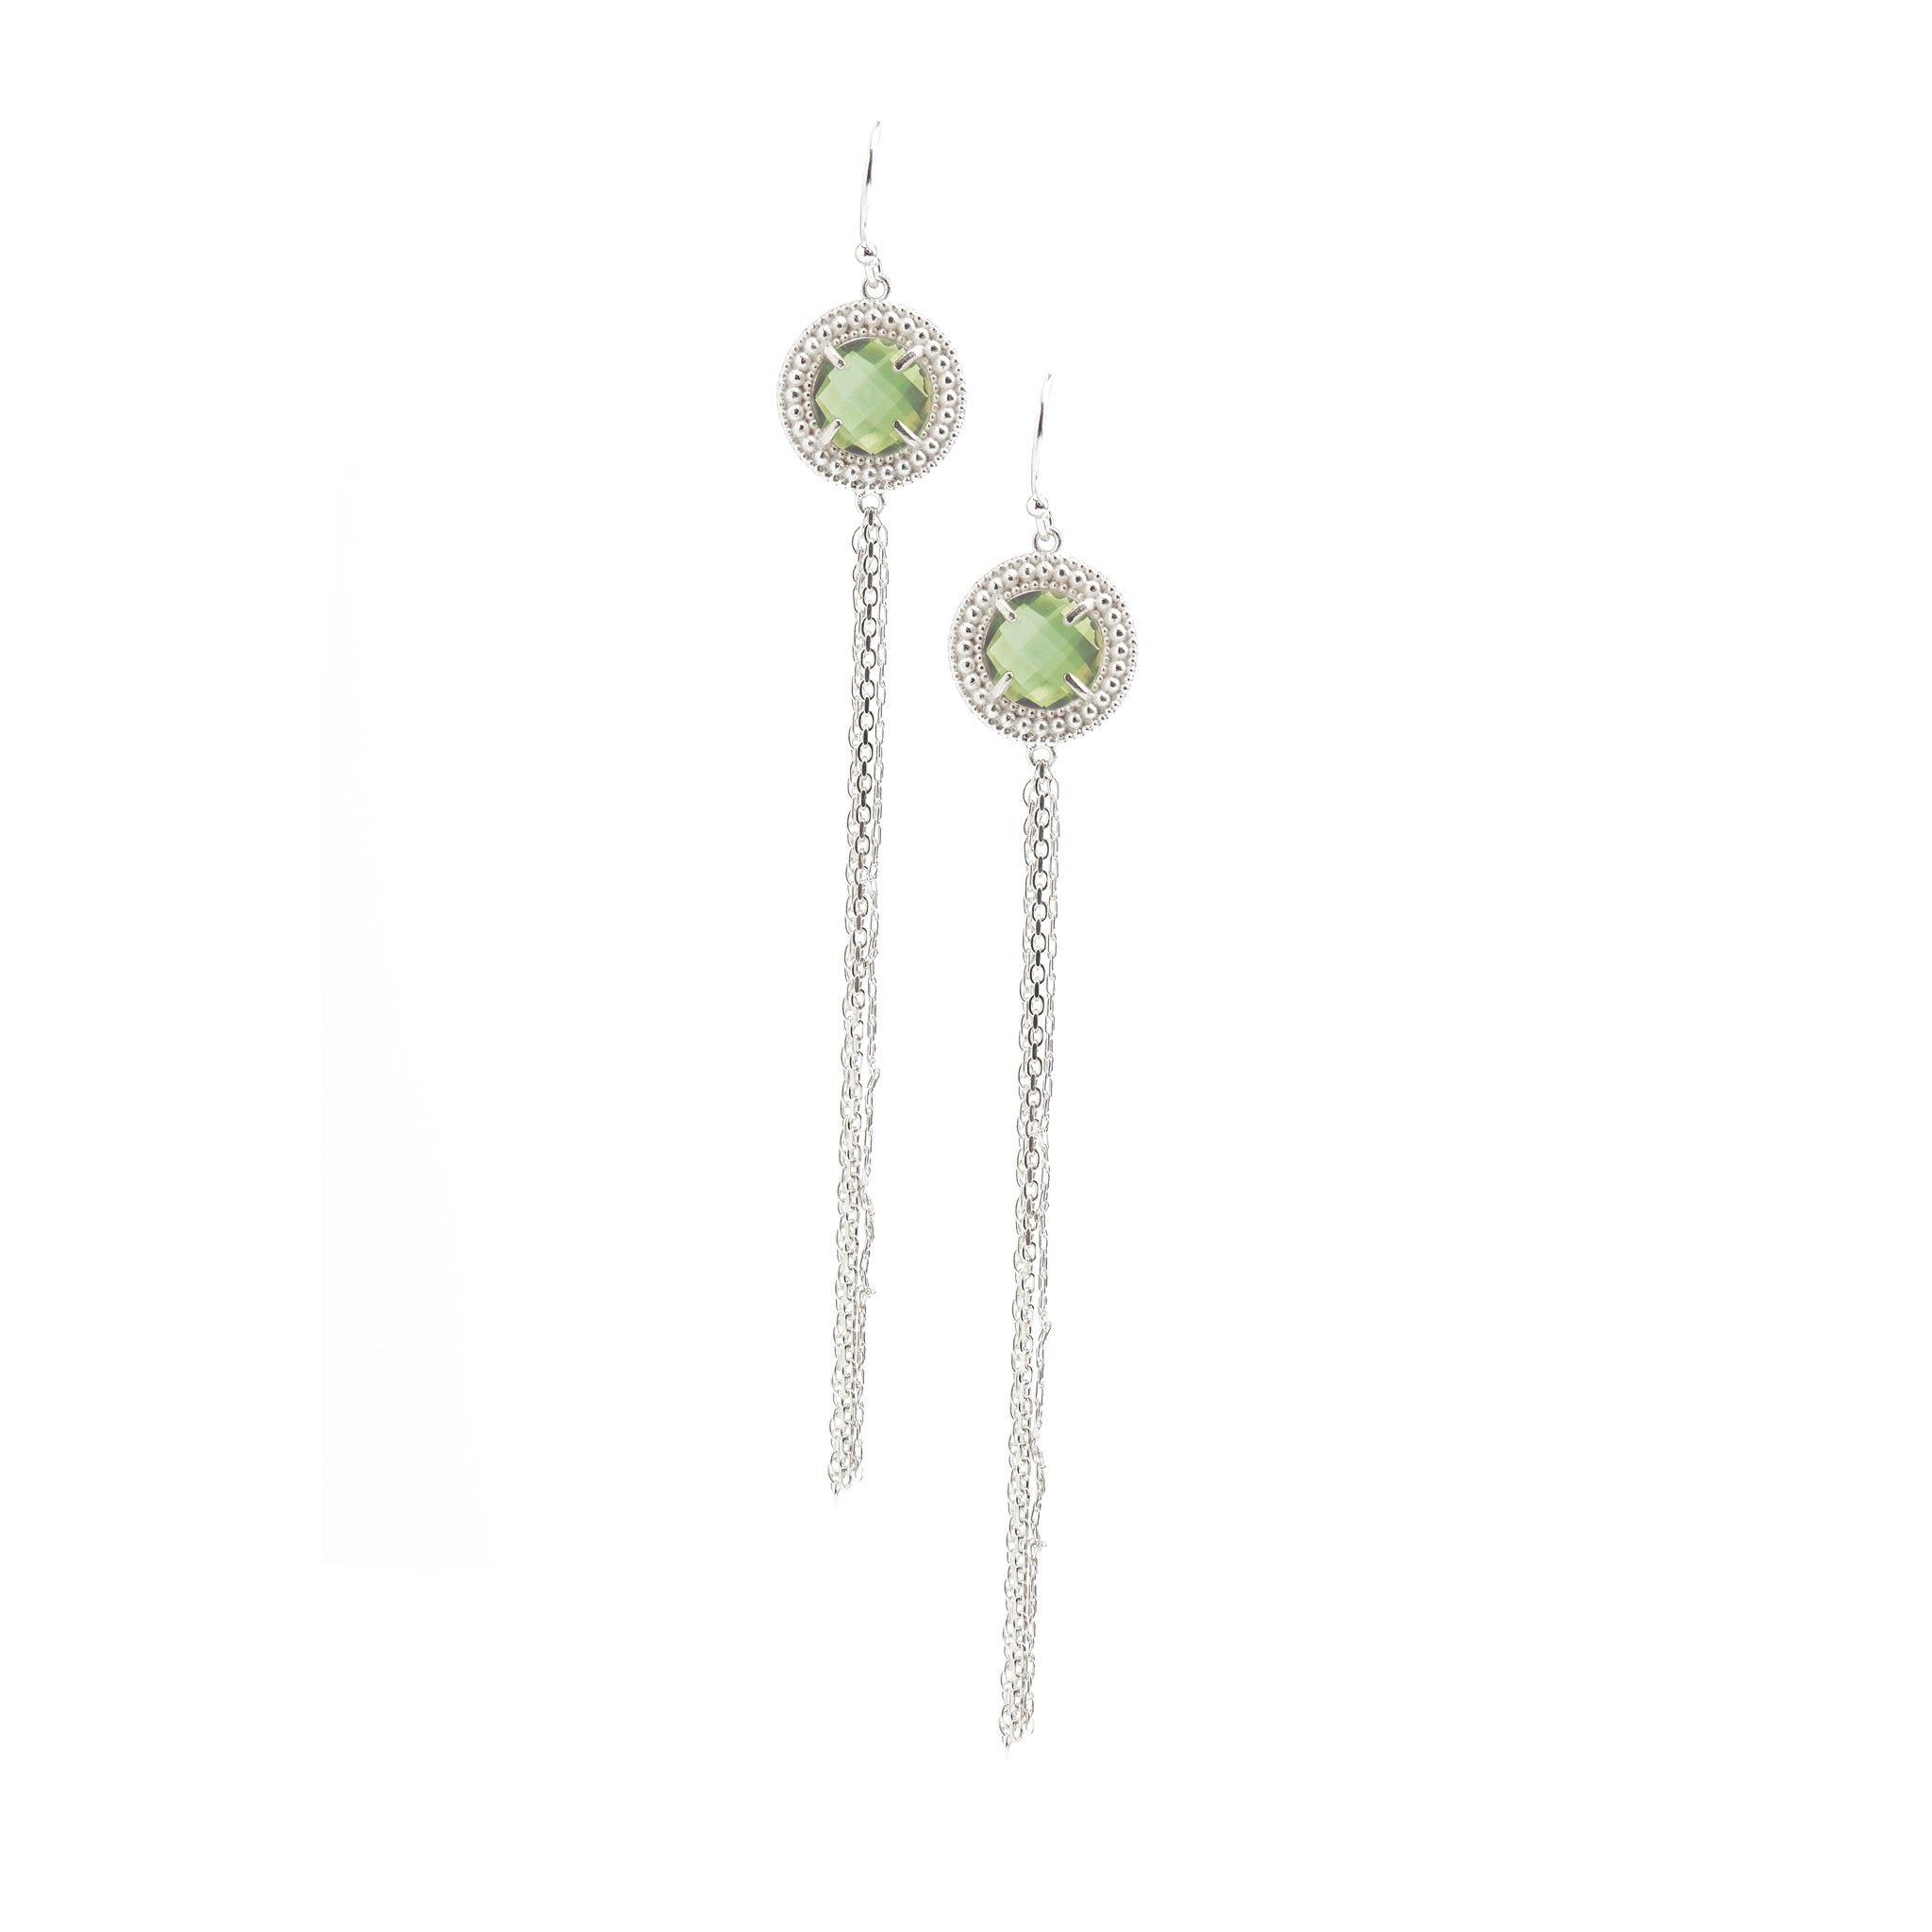 The Renaissance Ethnic earrings in Green Amethysts. - Christelle Chamberland